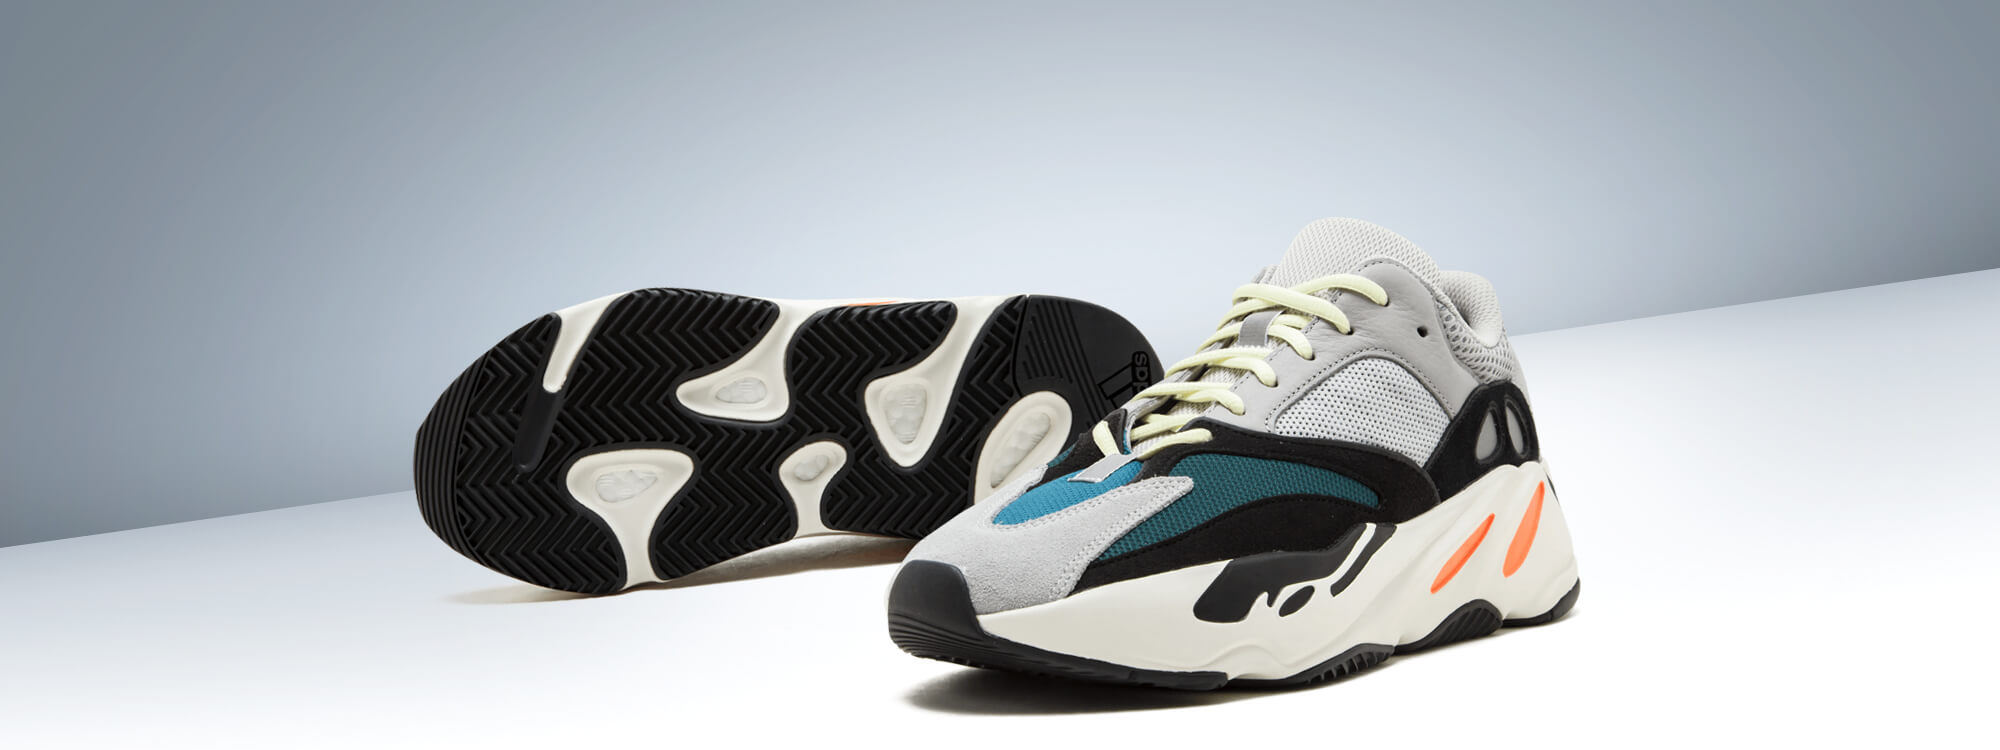  Yeezy Boost 700  Wave Runner  shoes price